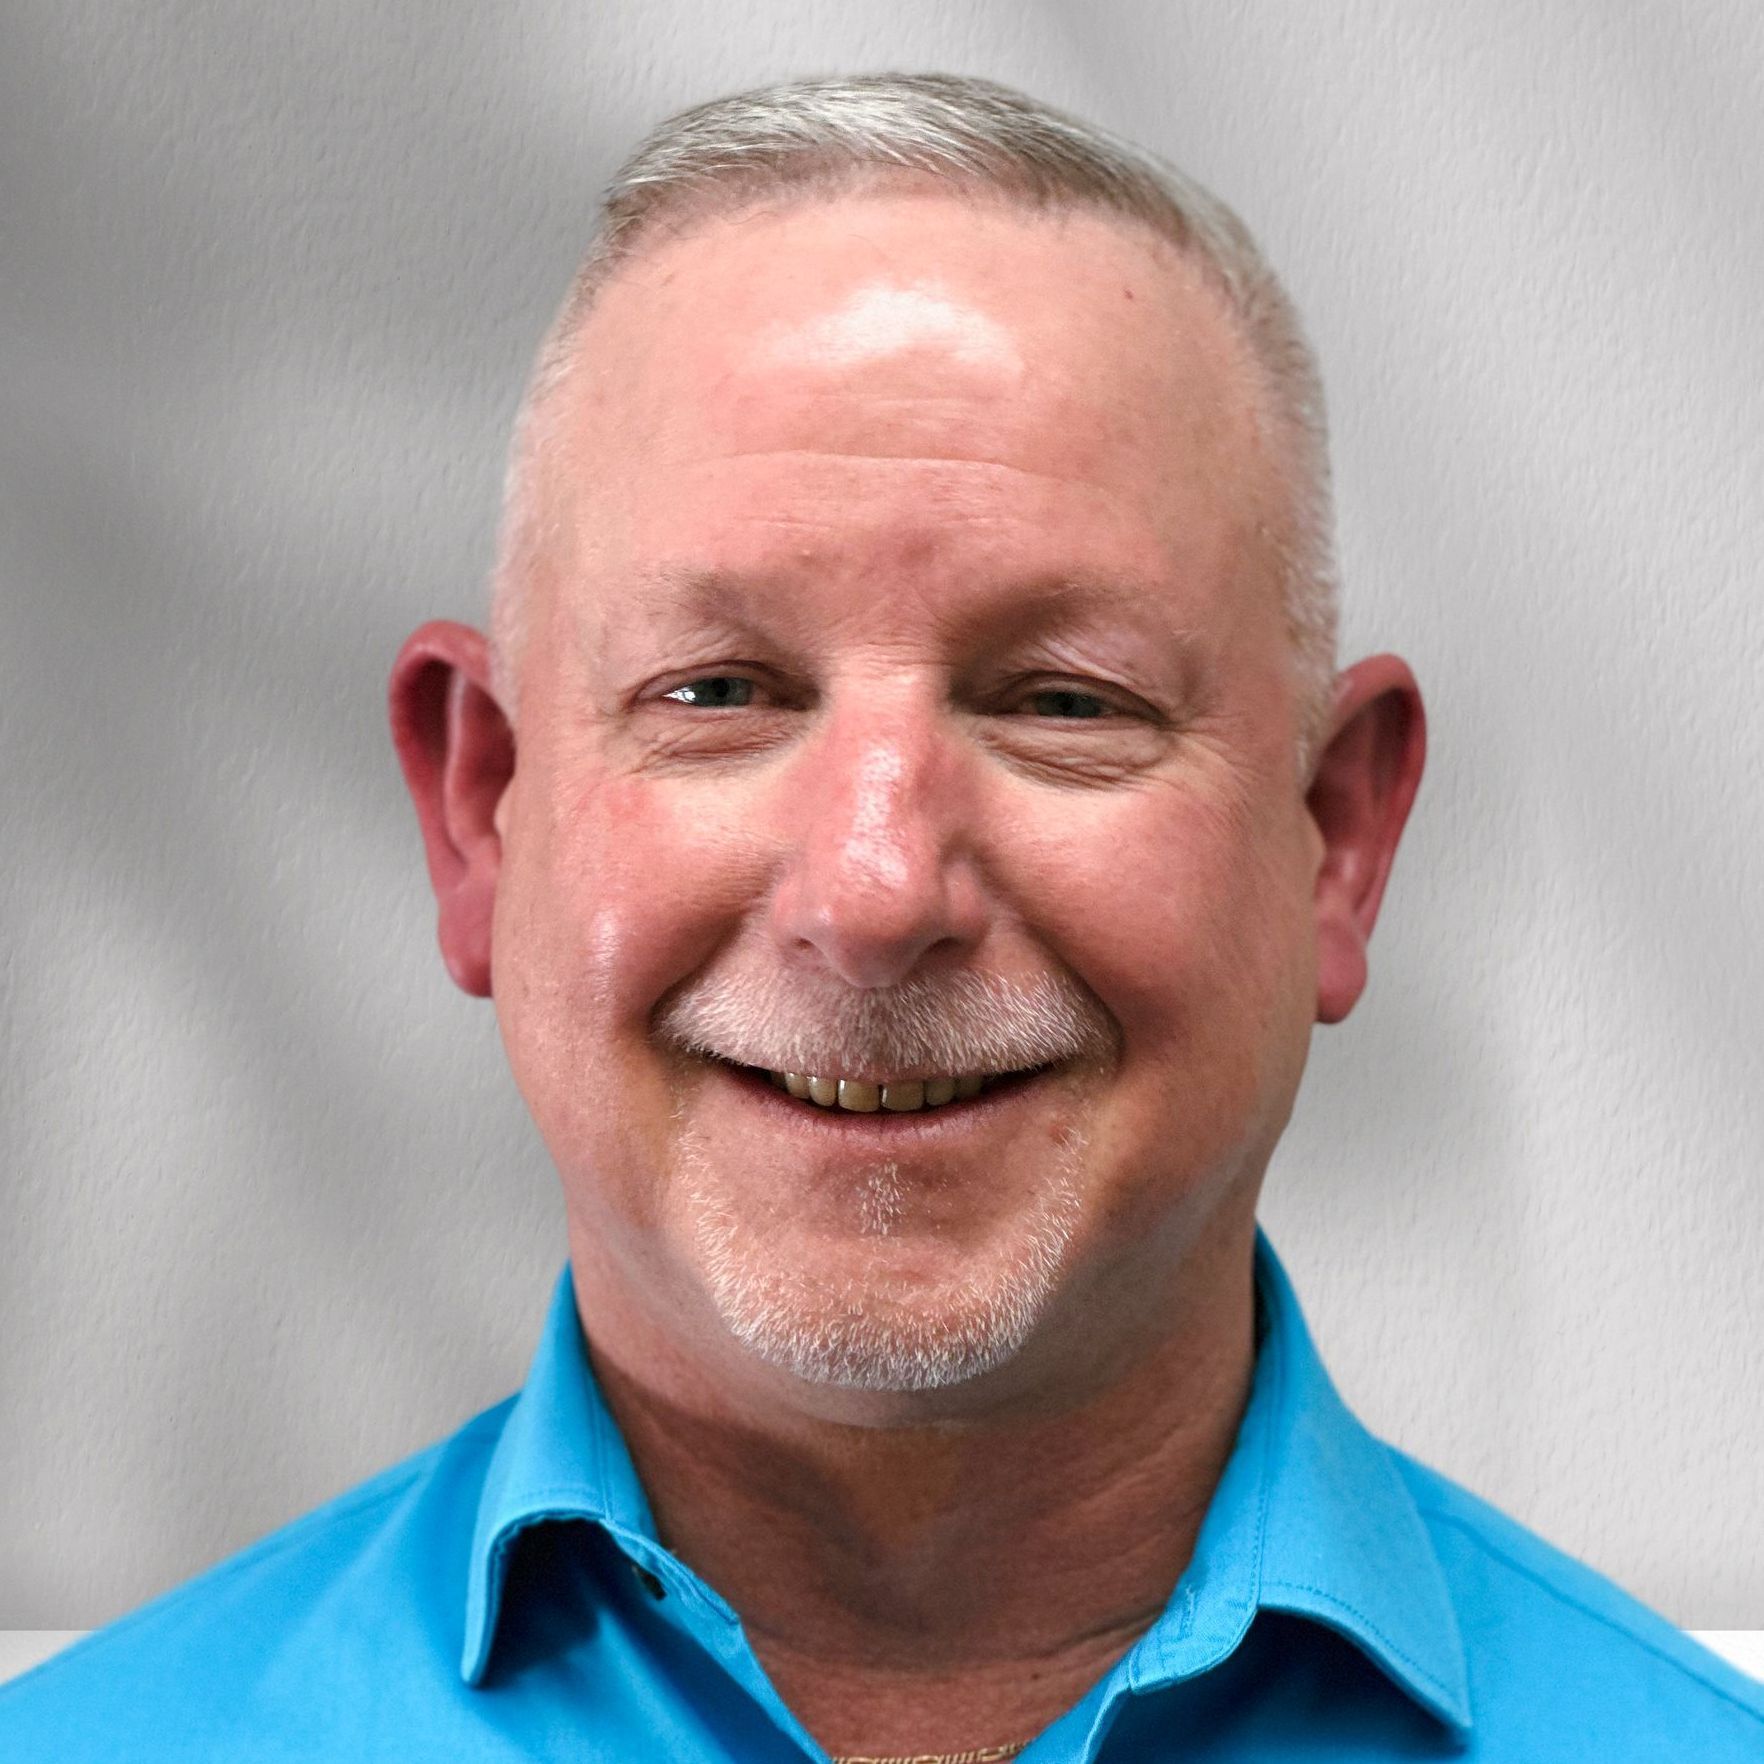 M. Scott Courtney, P.E., Senior Engineer and Practice Area Leader for Civil & Survey, Located in the Ashland, Virginia Office of ARM Group LLC. 